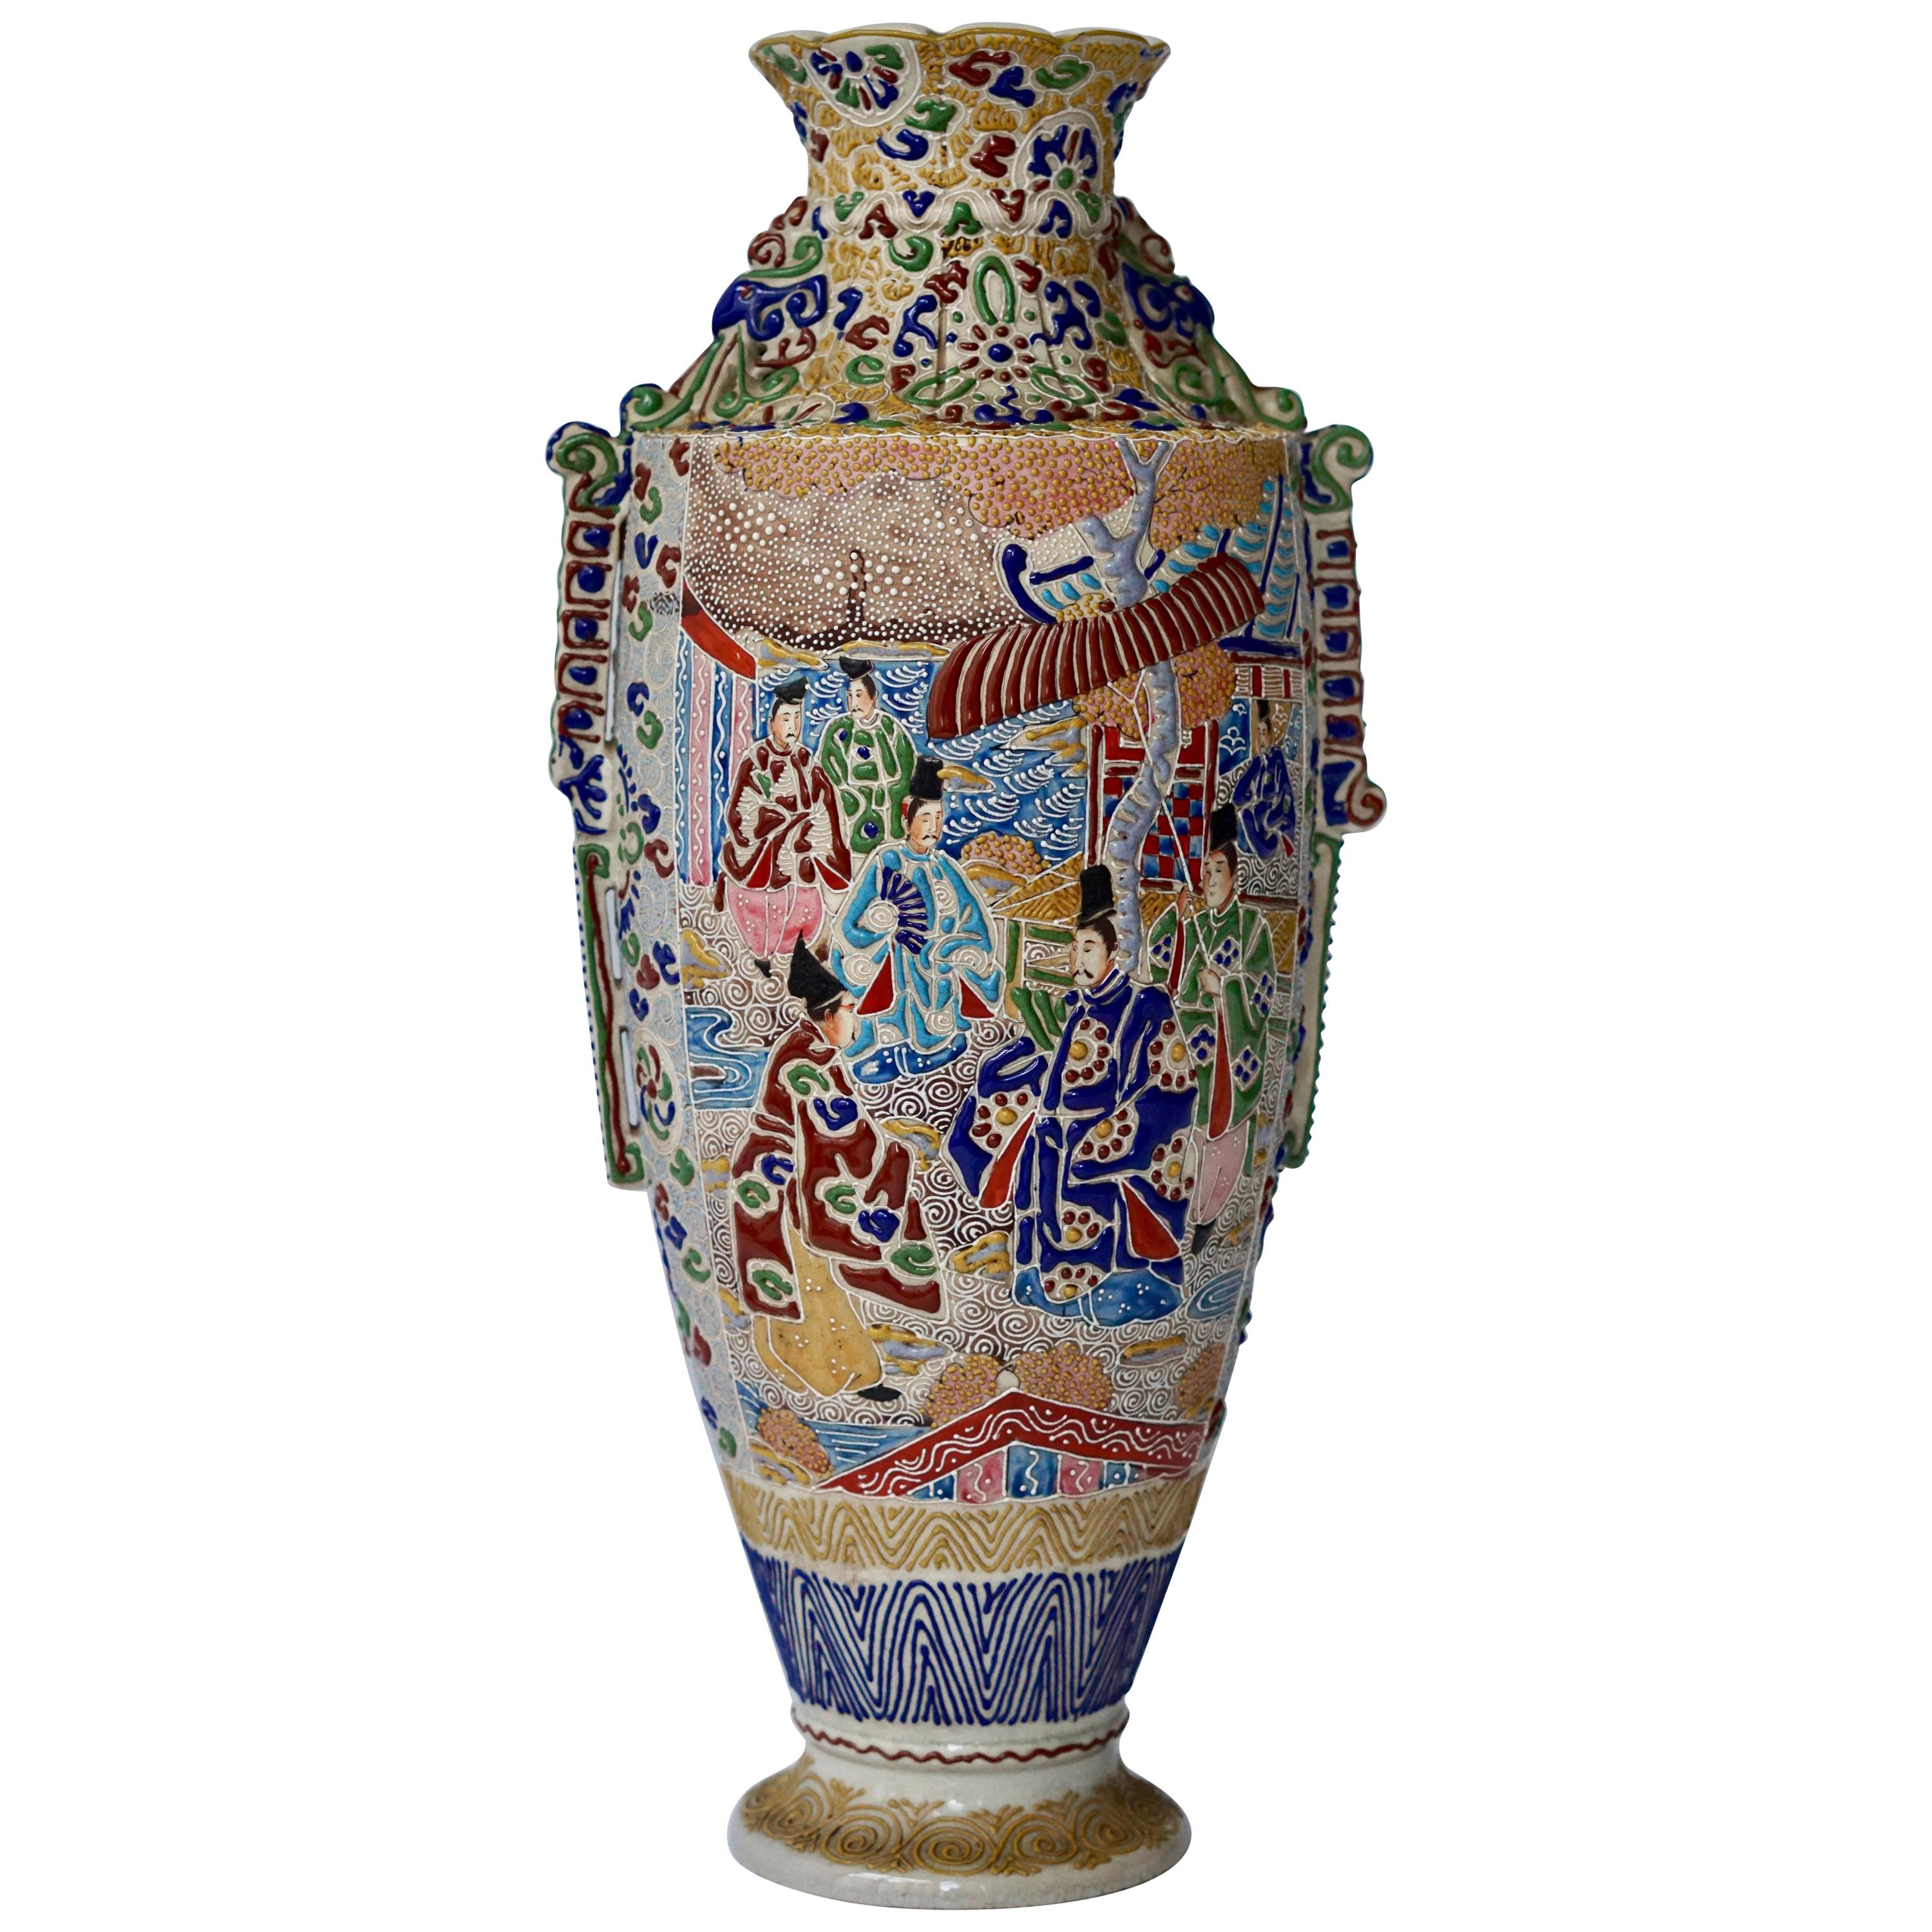 What is a Japanese Satsuma vase?